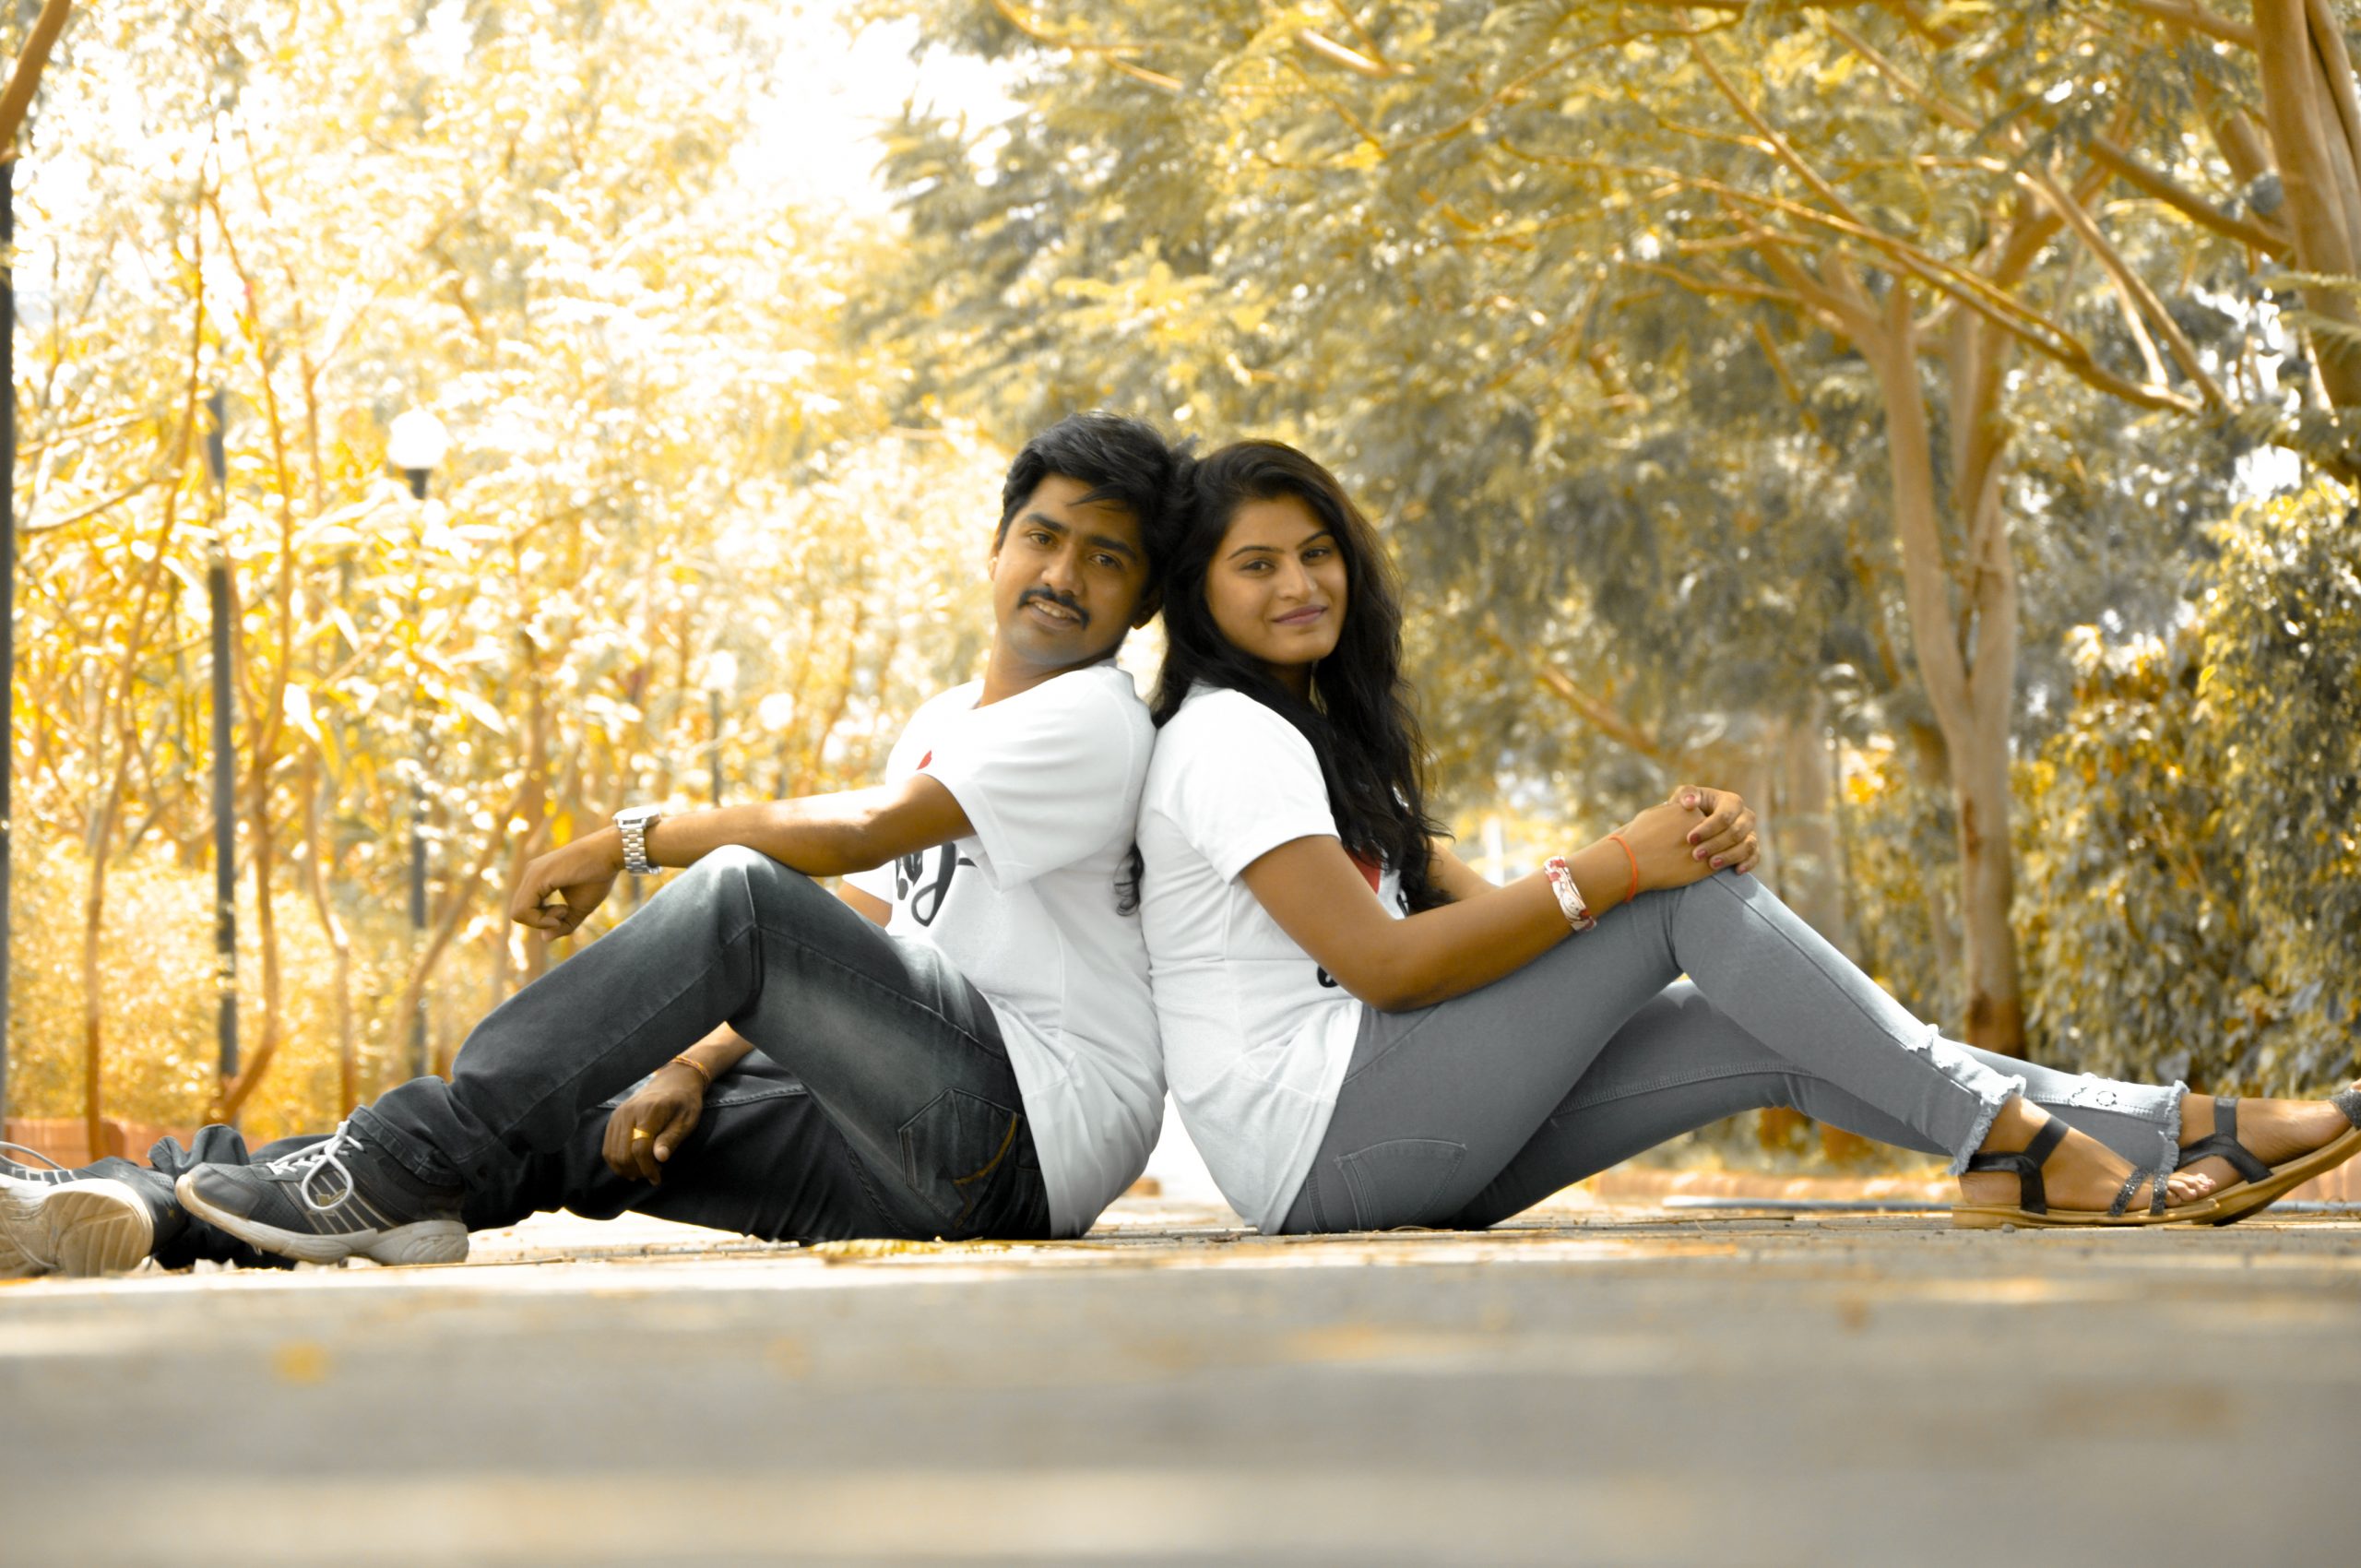 Couple posing on road